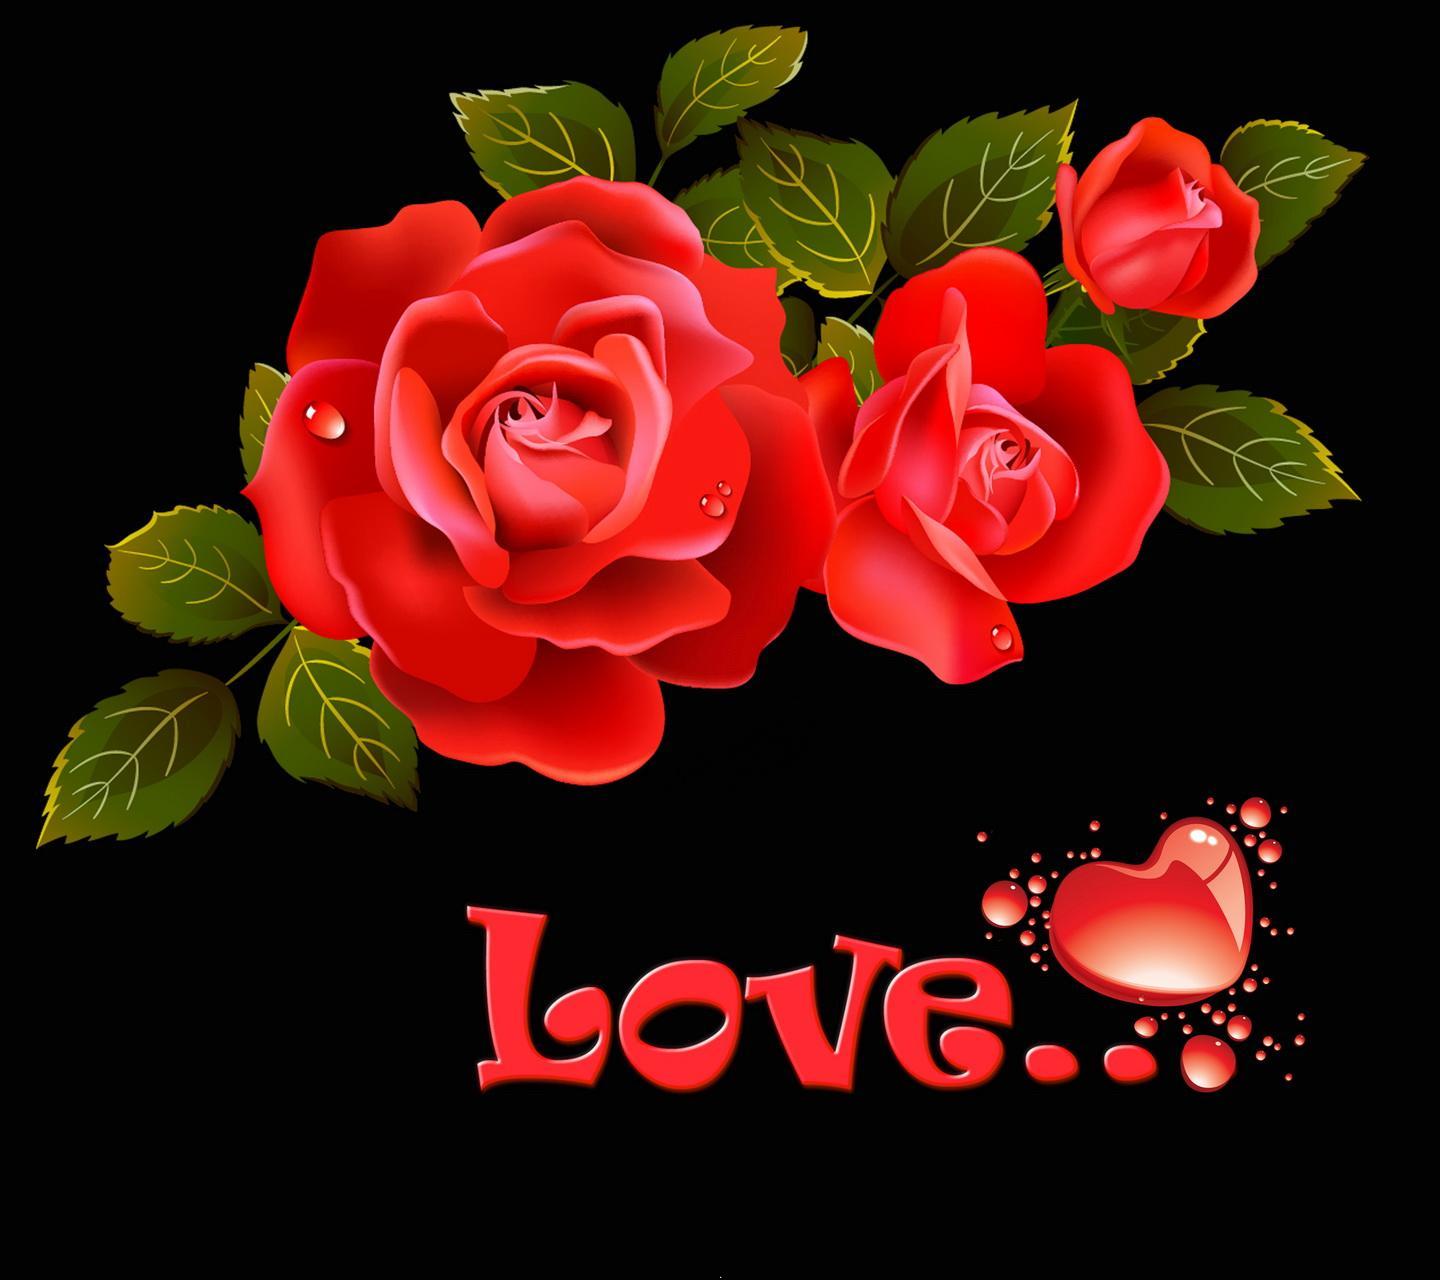 Download Love hd wallpaper for mobile 2 - Heart and rose hd wallpaper for  your mobile cell phone